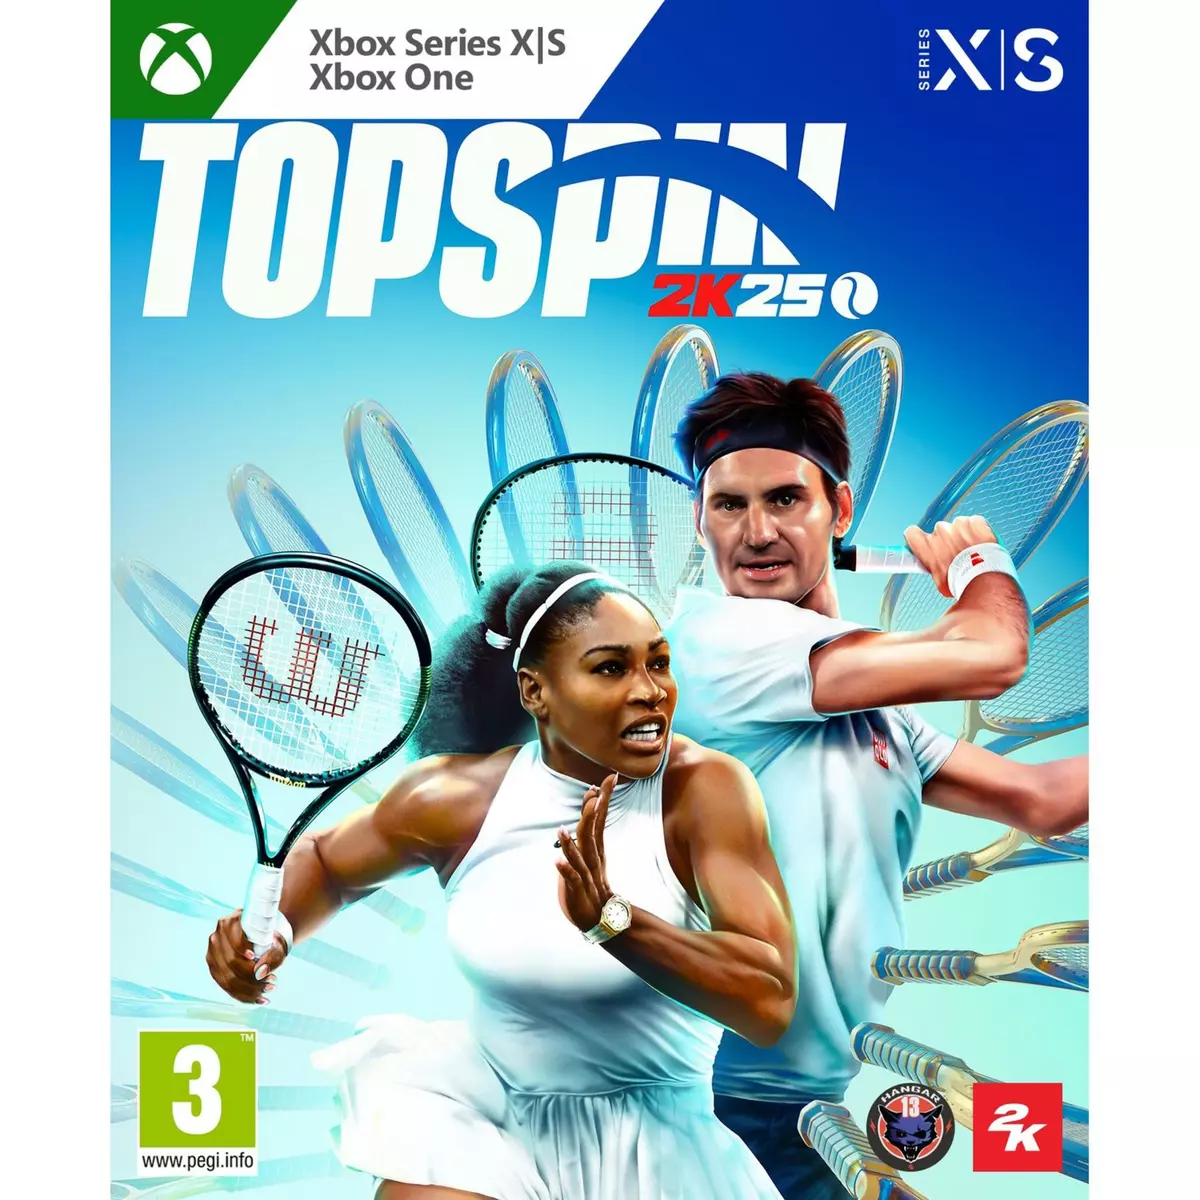 TopSpin 2K25 Xbox Series X - Xbox One